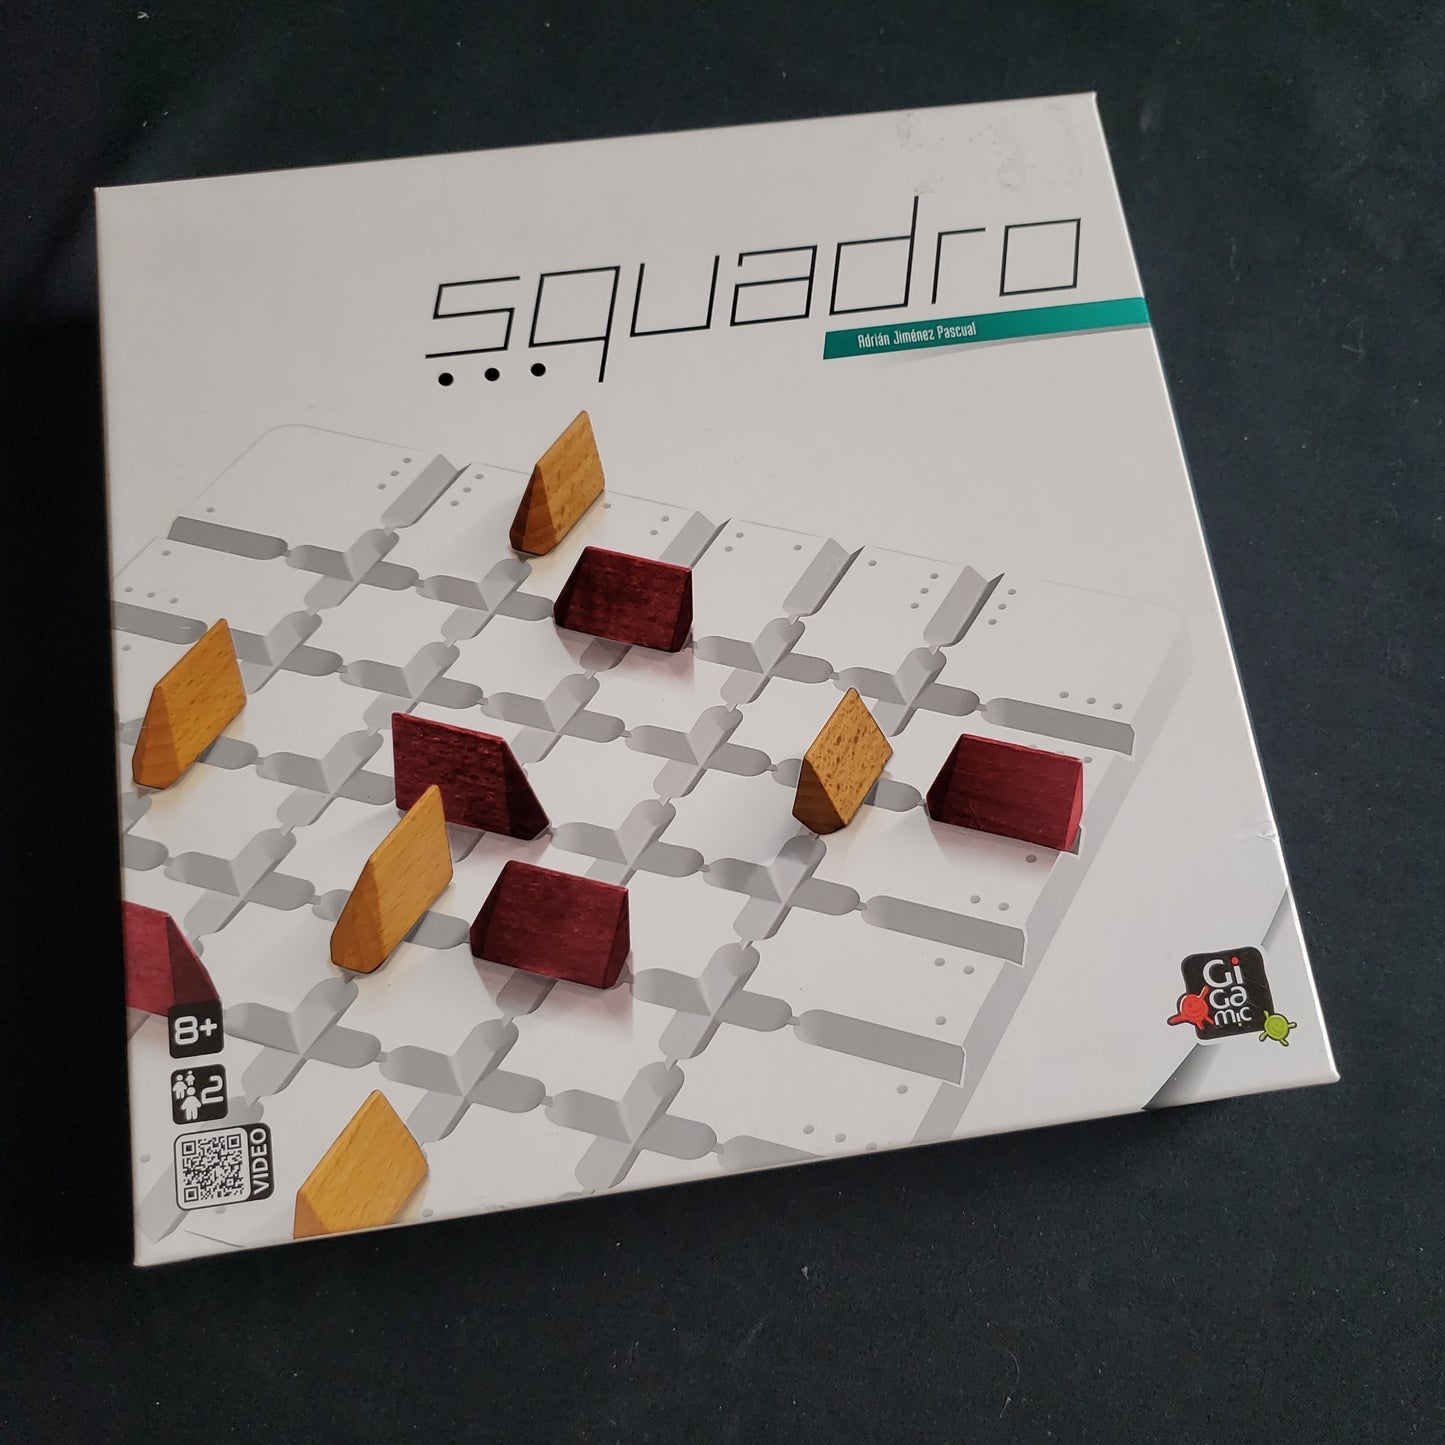 Image shows the front cover of the box of the Squadro board game